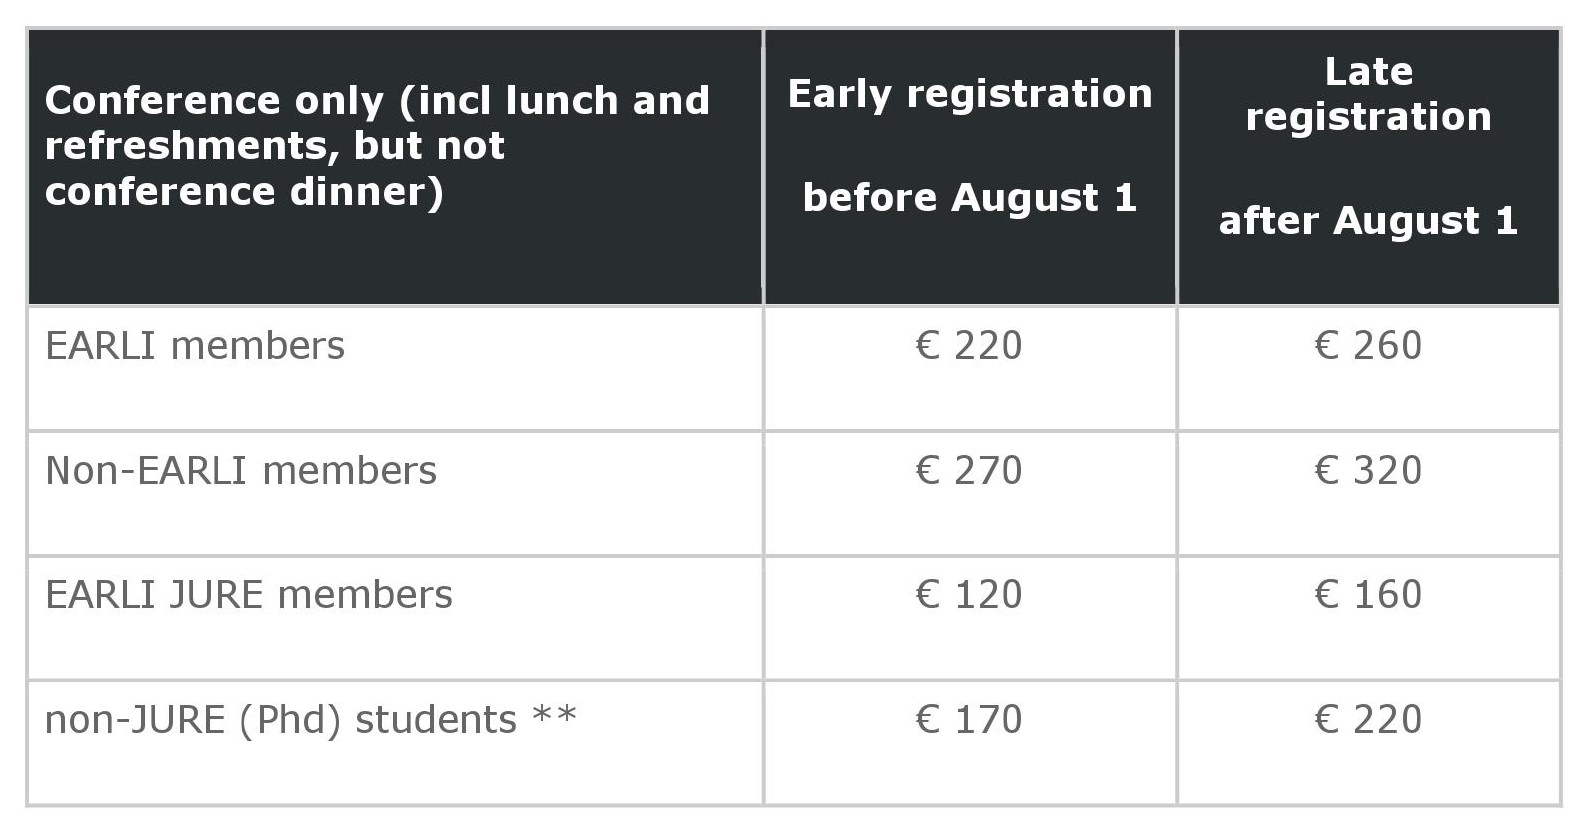 Fees for the conference ticket only (without the dinner). From € 120 for early bird JURE members to € 320 Non-EARLI members late registration.